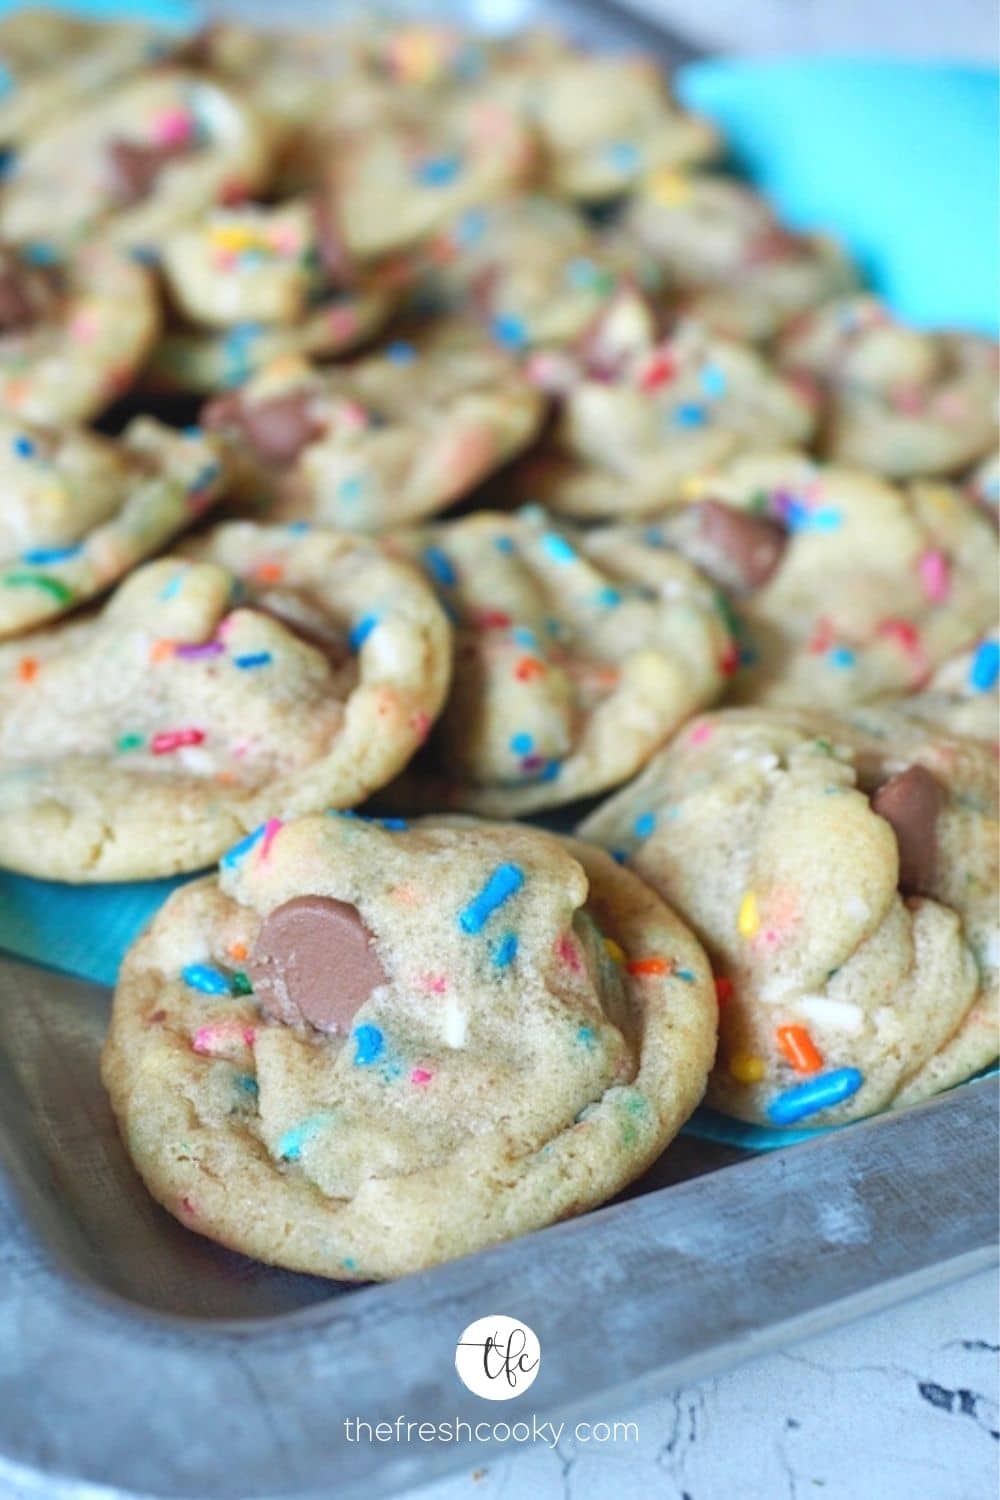 Galvanized tray filled with stacked brightly colored funfetti cake mix chocolate chip cookies.